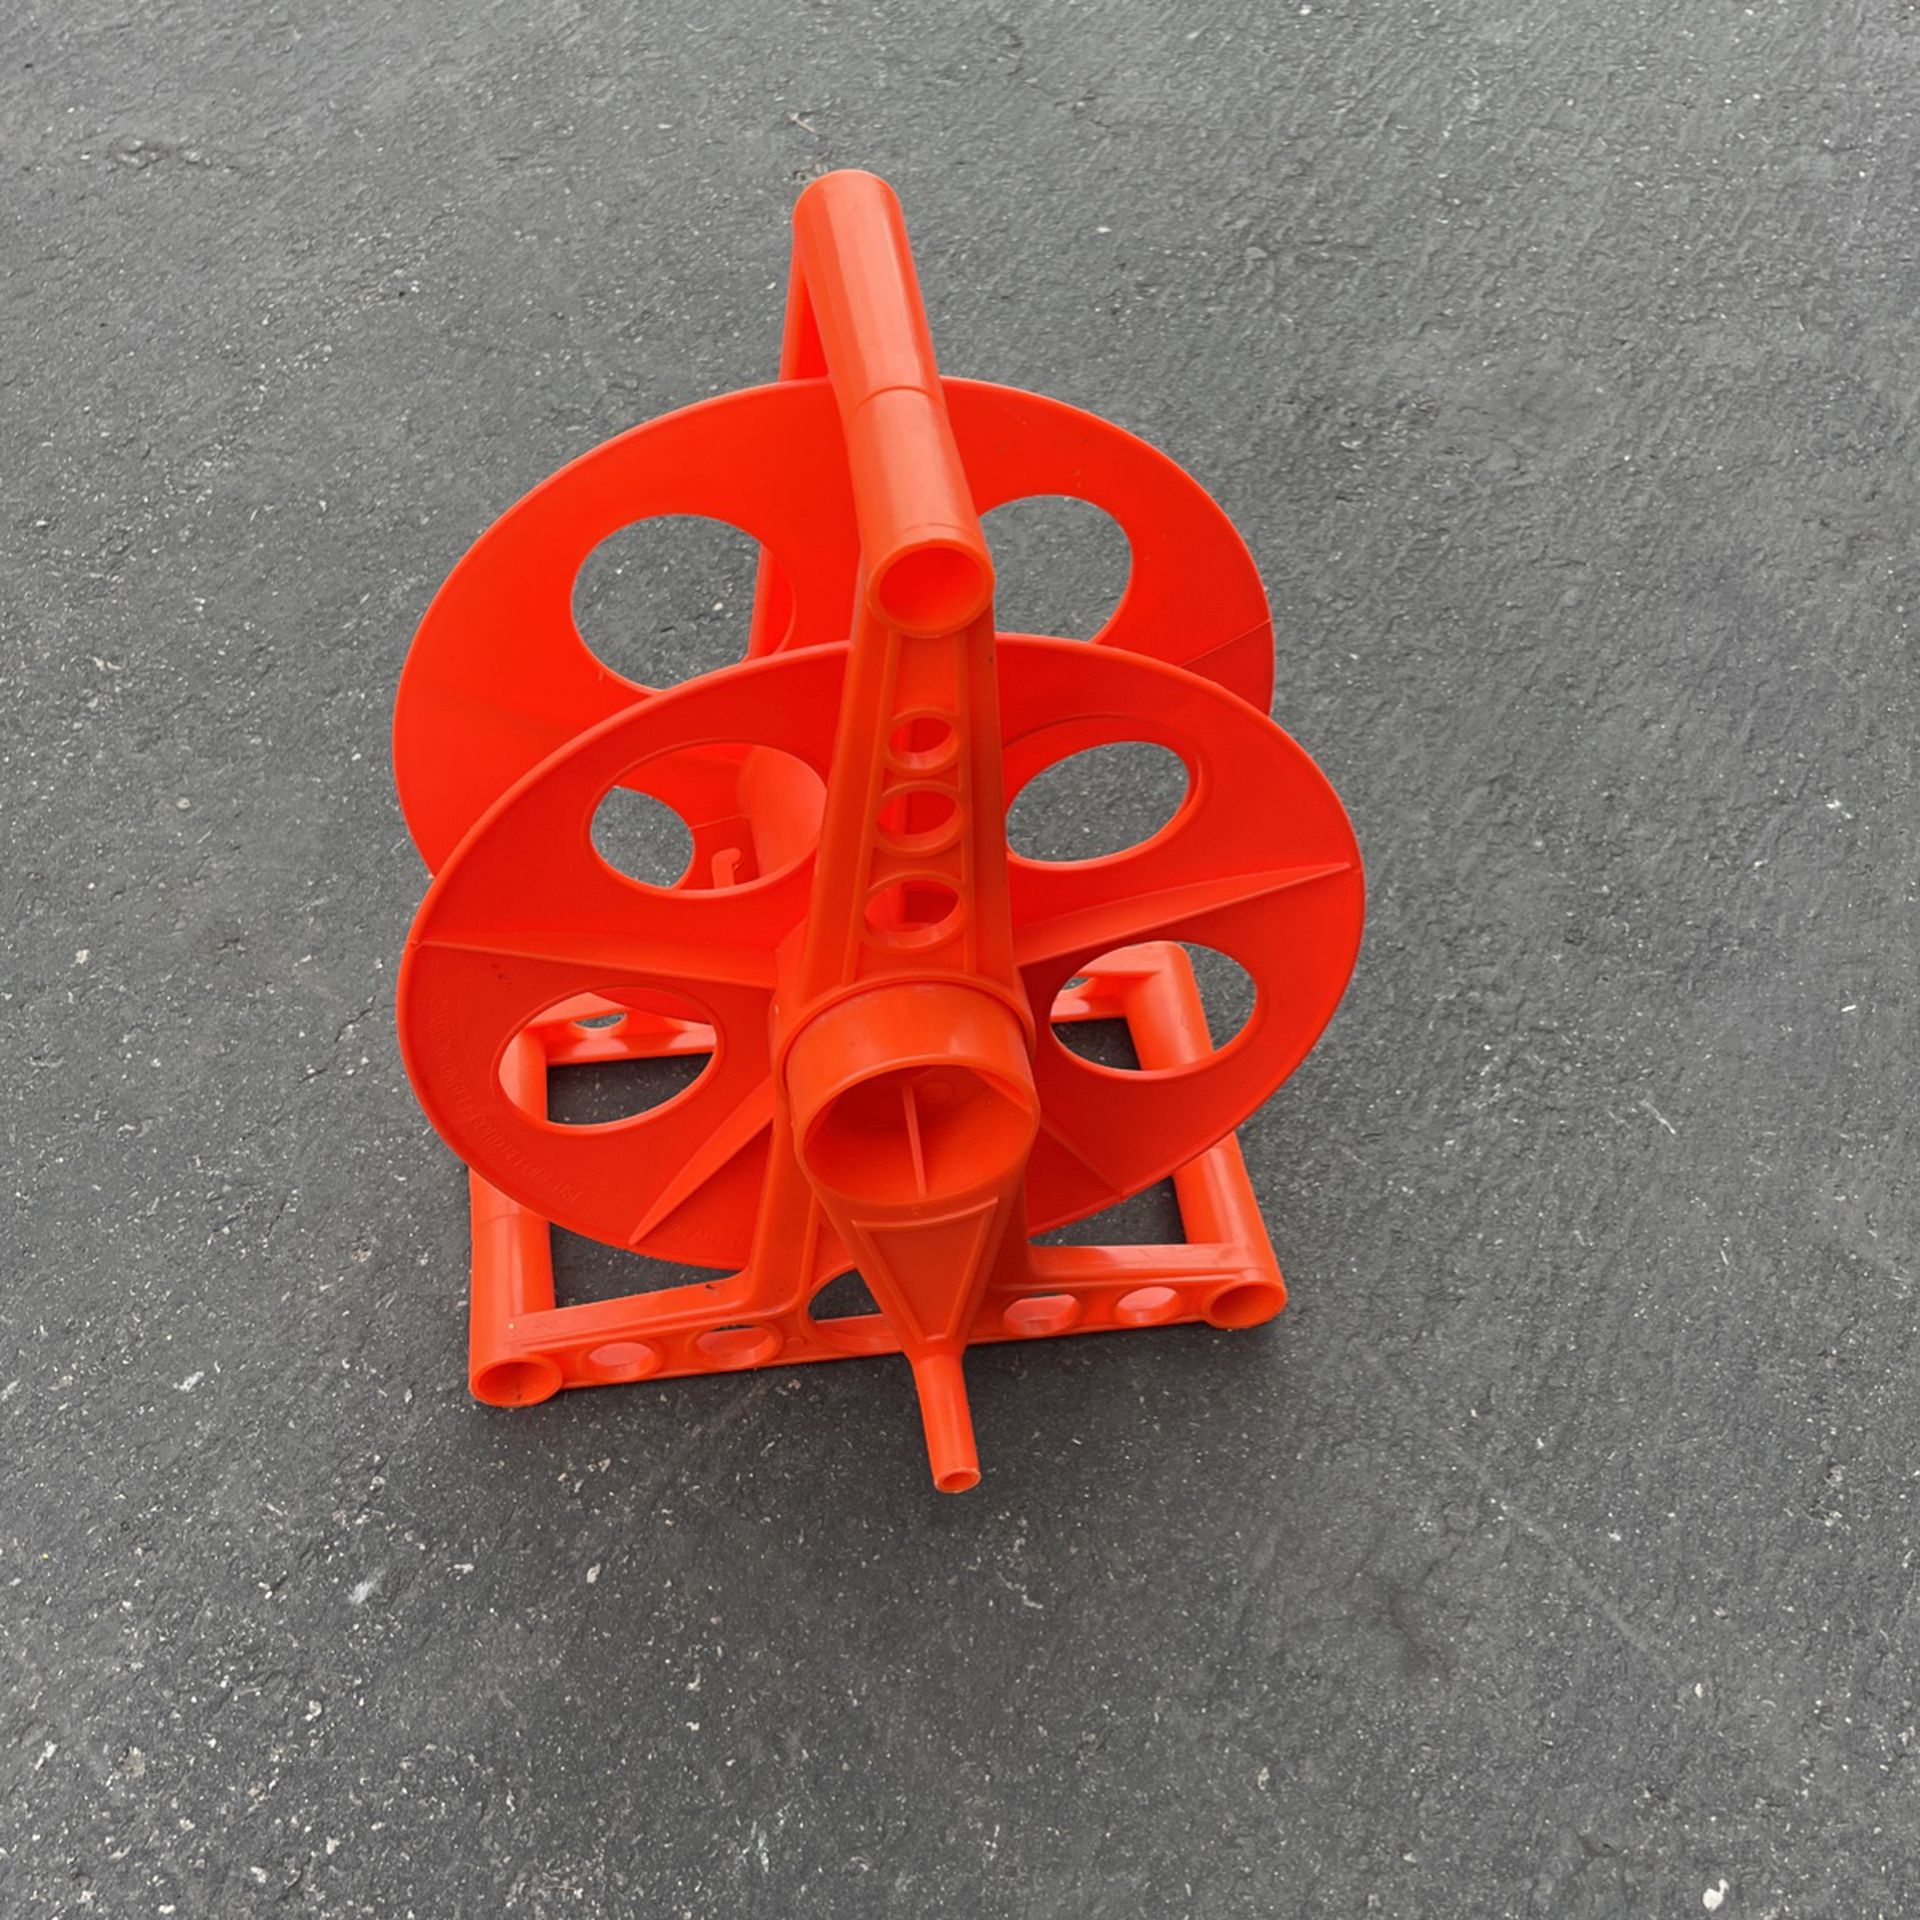 Hdx Extension Cord Storage Reel with Stand for Sale in Carson, CA - OfferUp